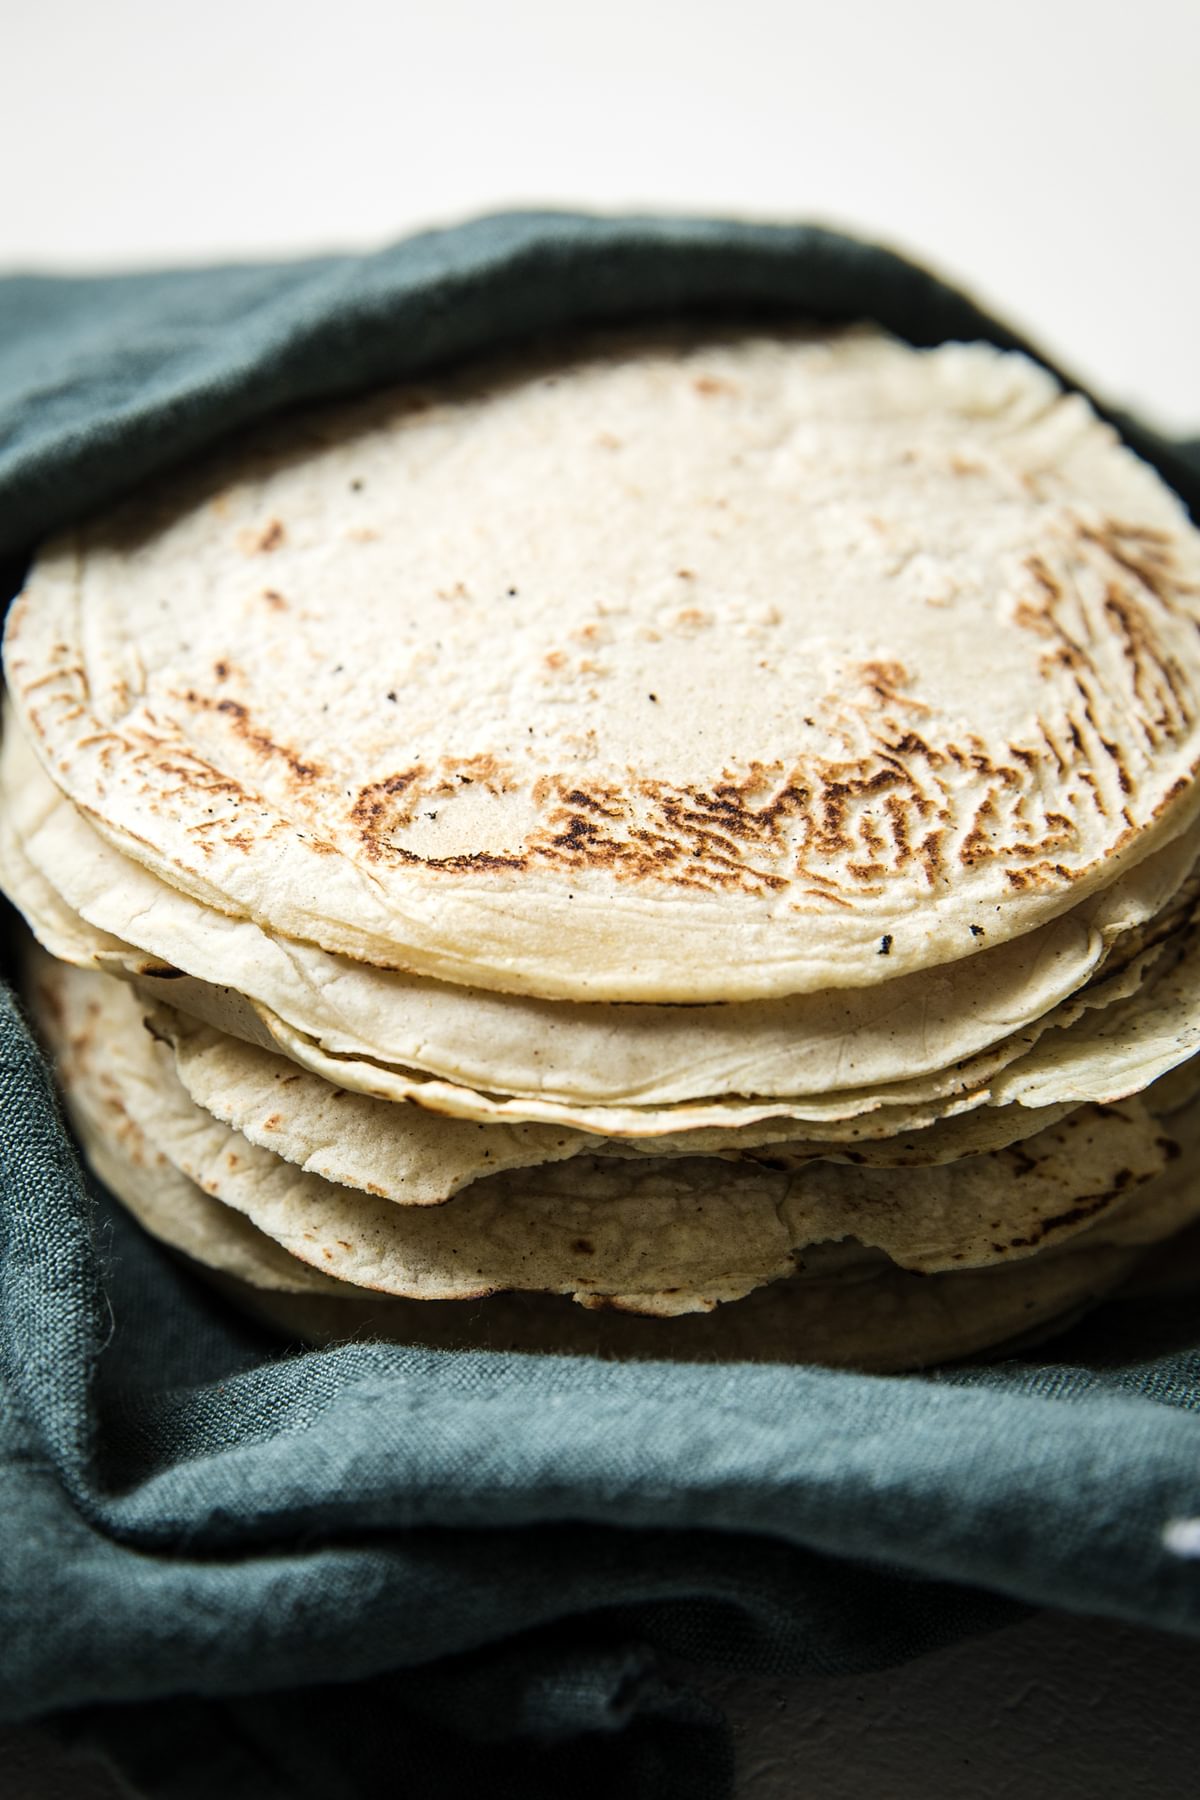 Homemade corn tortillas wrapped in a towel